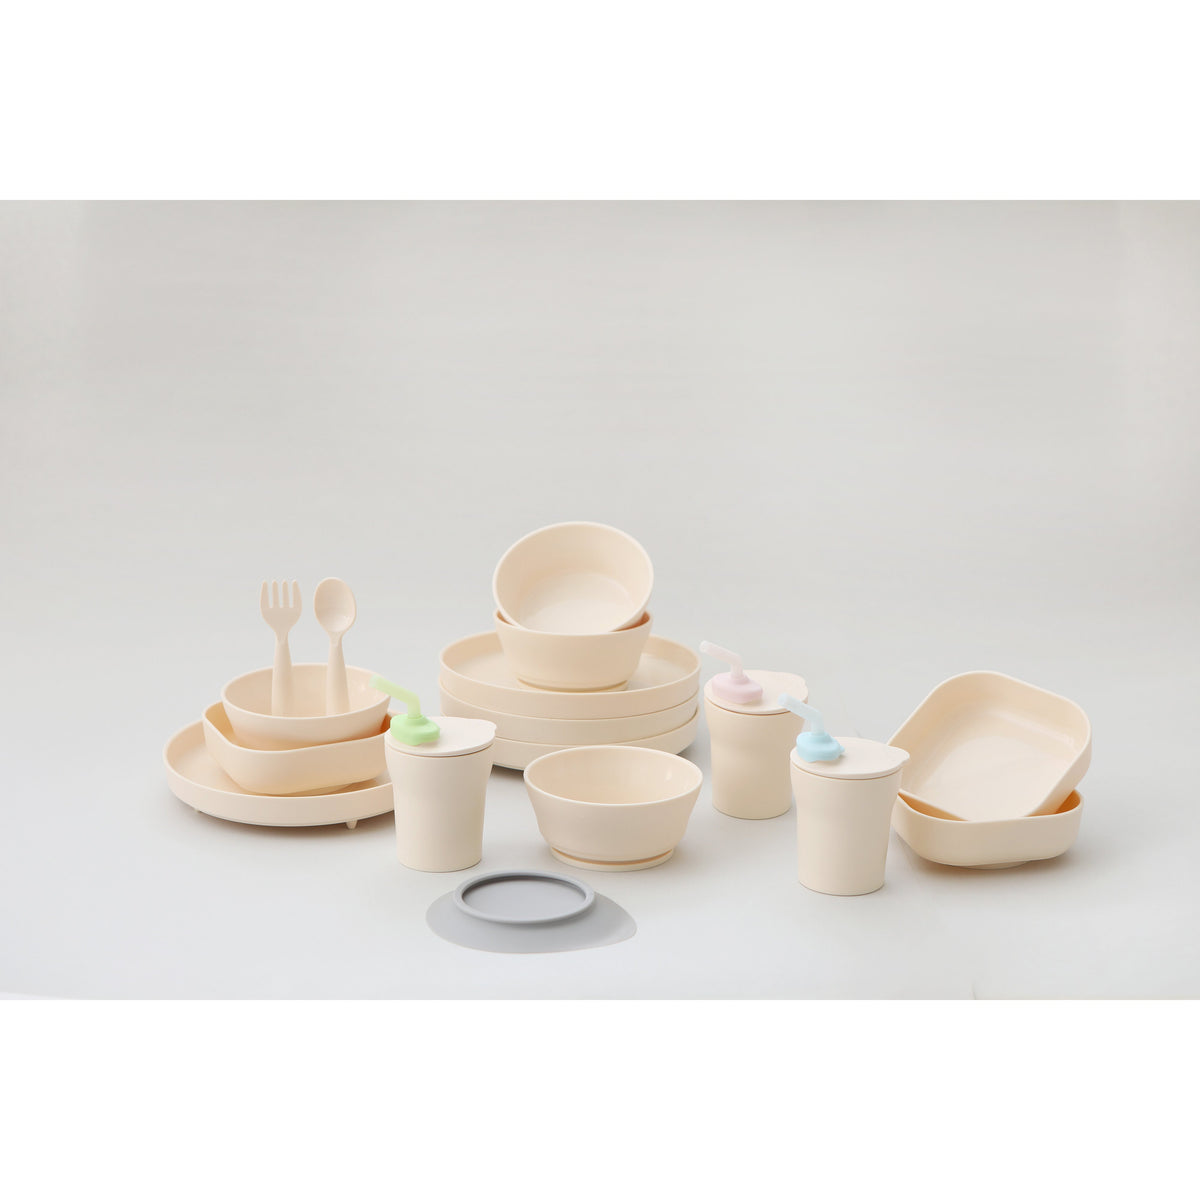 miniware-first-bite-set-pla-cereal-suction-bowl-vanilla-+-silicone-spoon-and-cover-in-cotton-grey- (21)